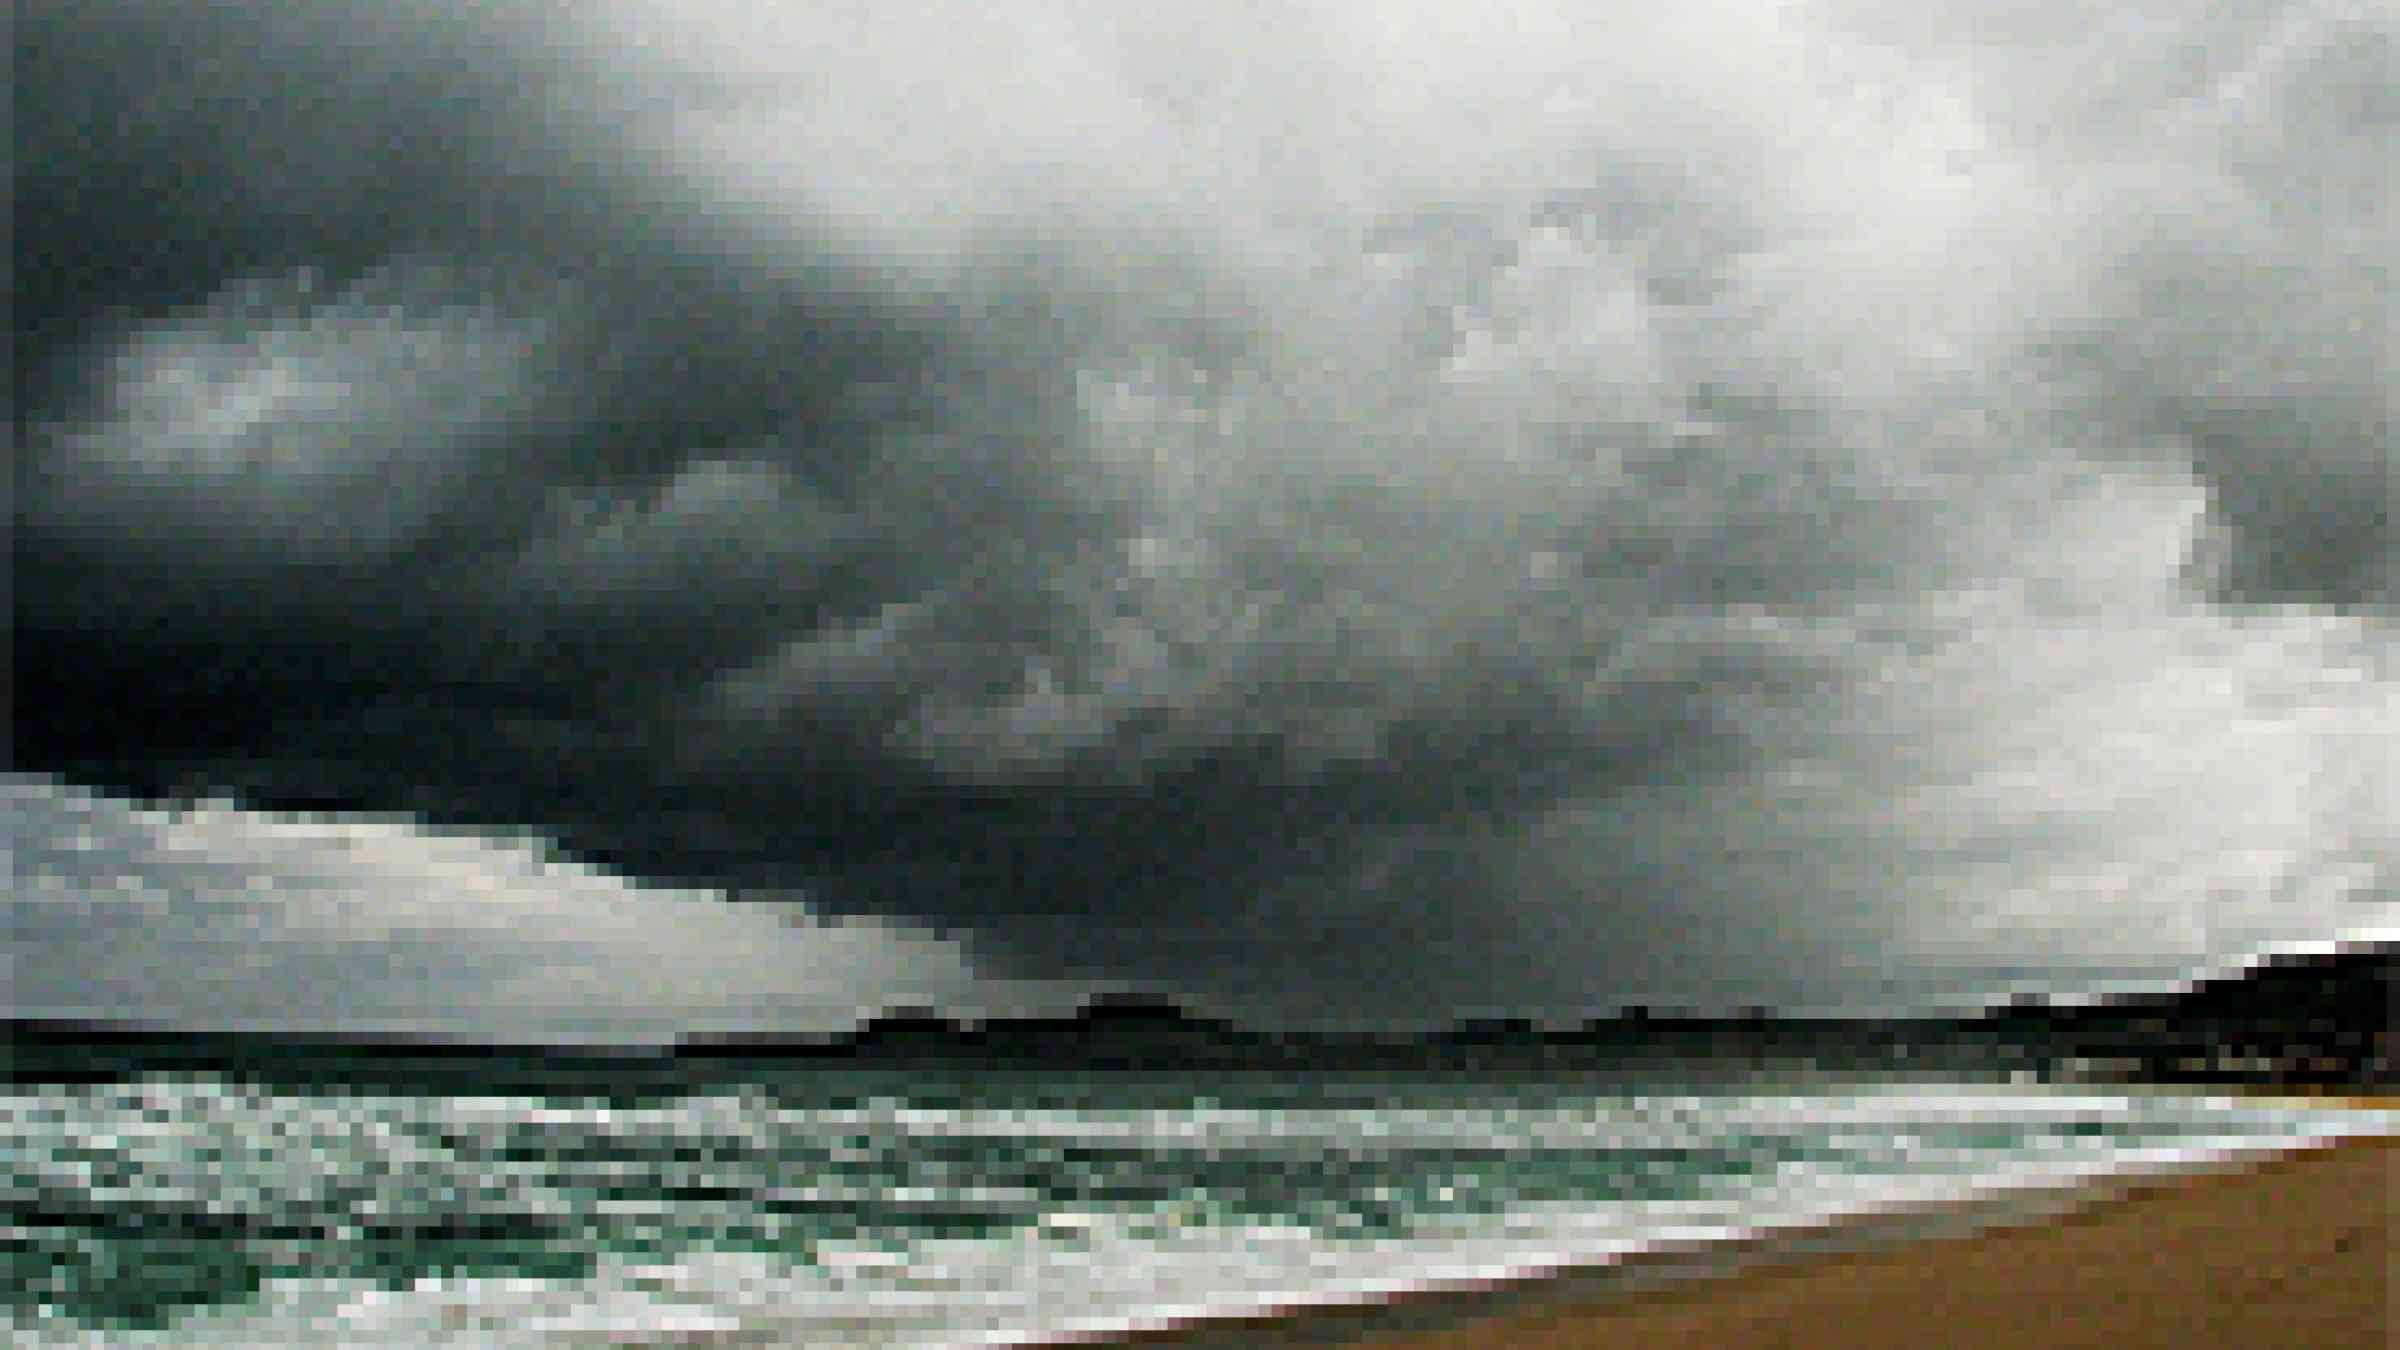 Photo of Hurricane Rick over Baja California by Flickr user Ani Carrington, Creative Commons Attribution 2.0 Generic, http://www.flickr.com/photos/35506817@N00/4113341728/